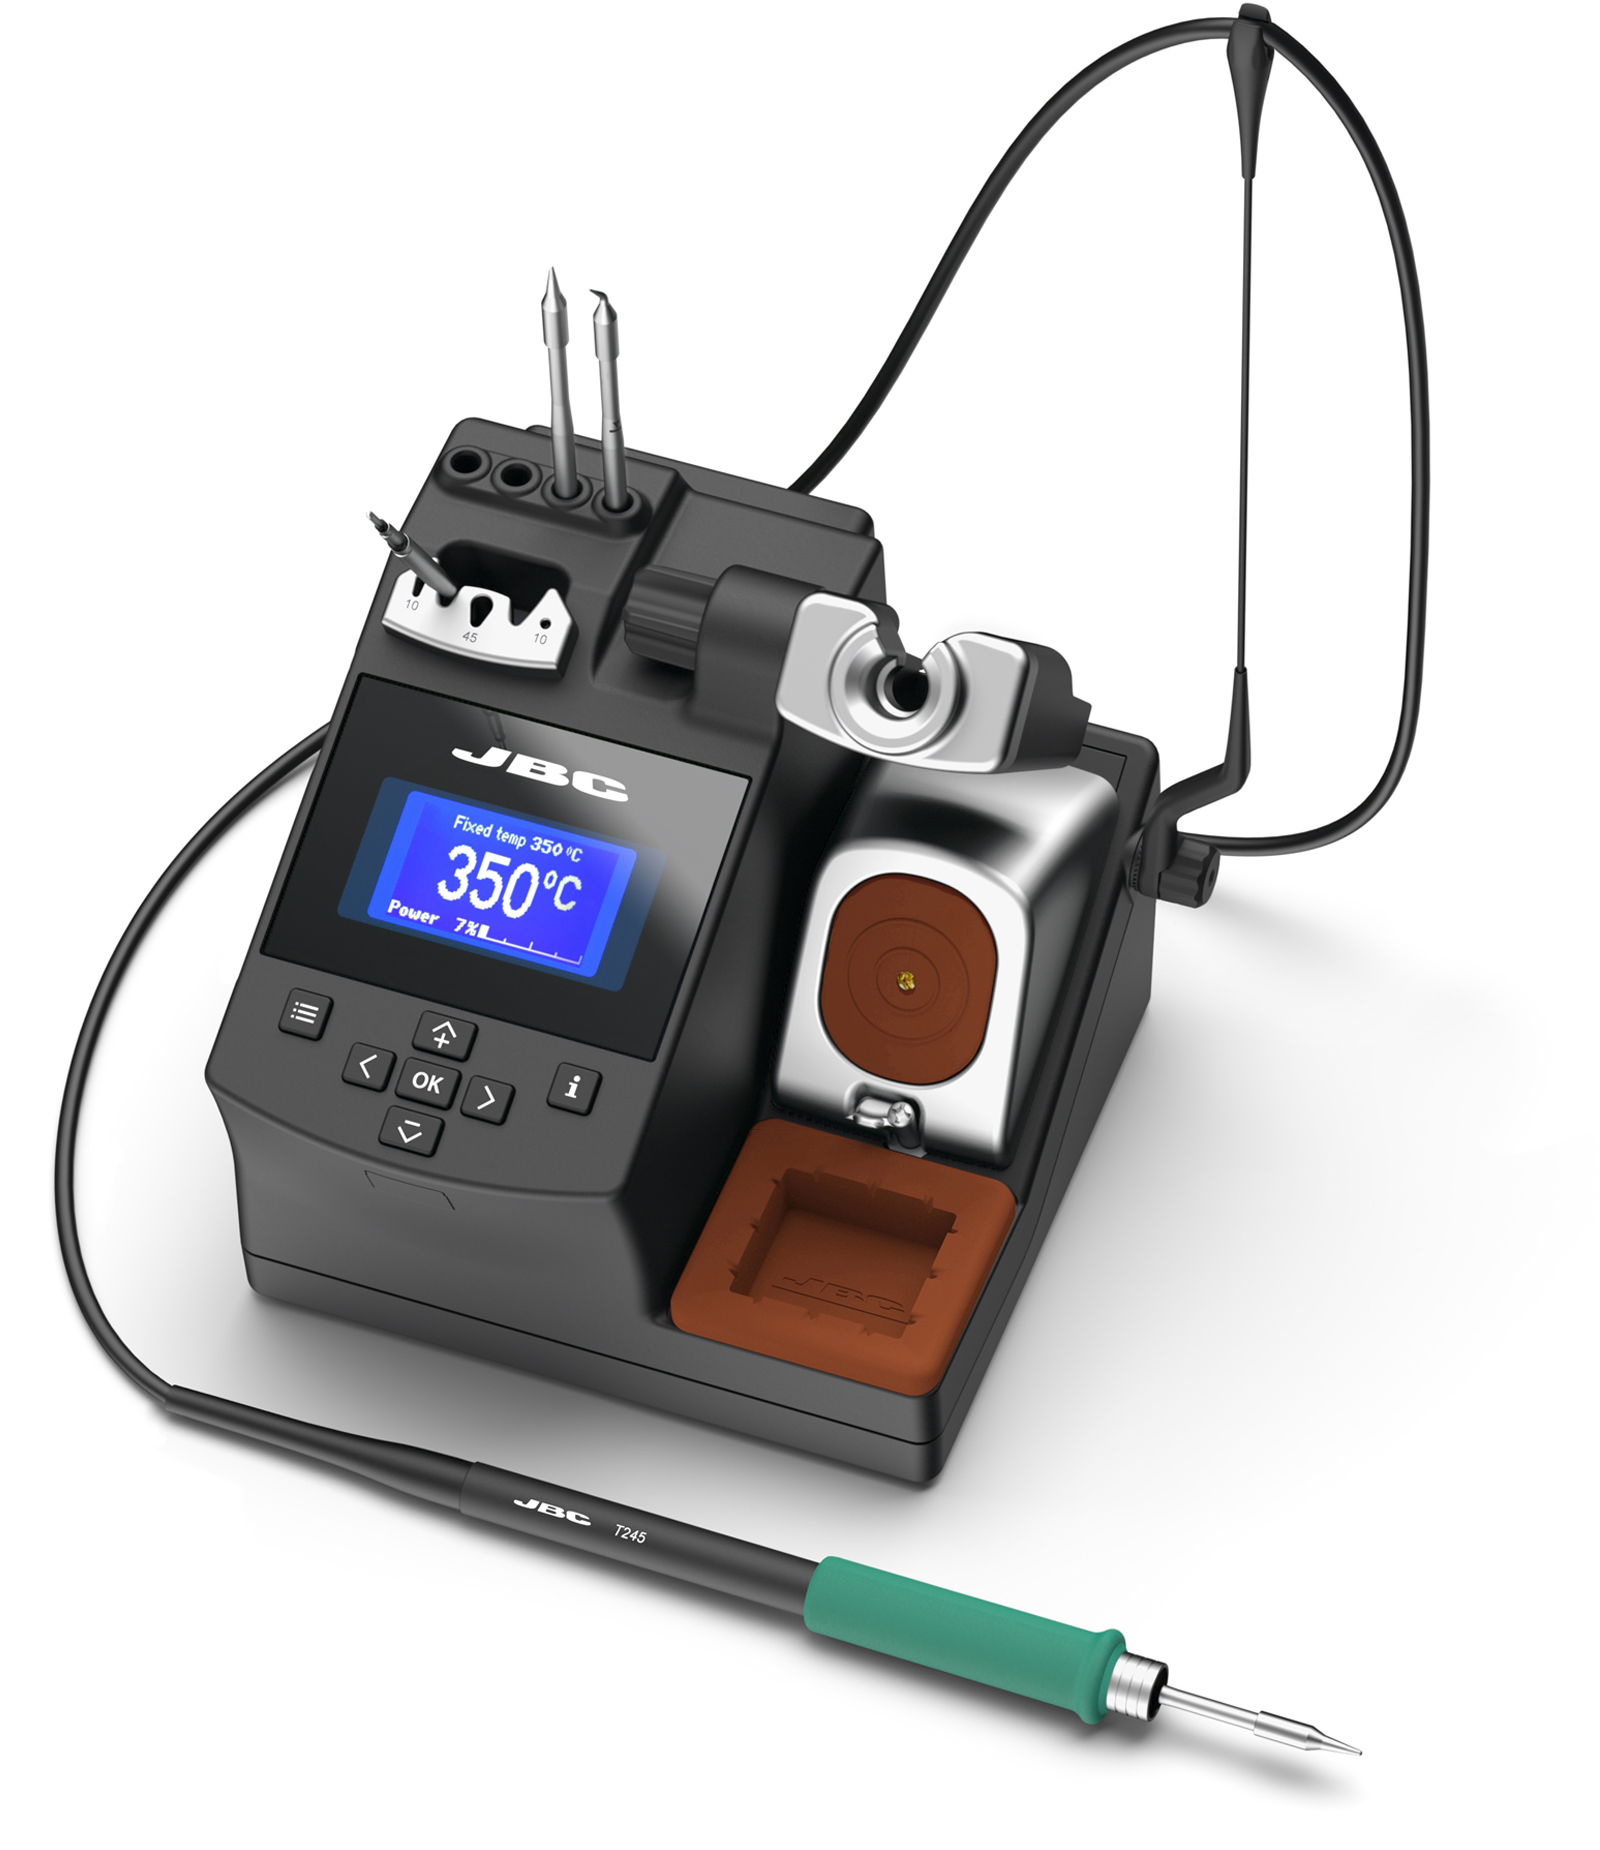 JBC Soldering Tools - CD-B is the ideal #solderingstation for general  #electronicapplications with a T245 Handle.⁠ ⁠ ➡️ It provides the best # soldering quality thanks to JBC Most Efficient Soldering System and